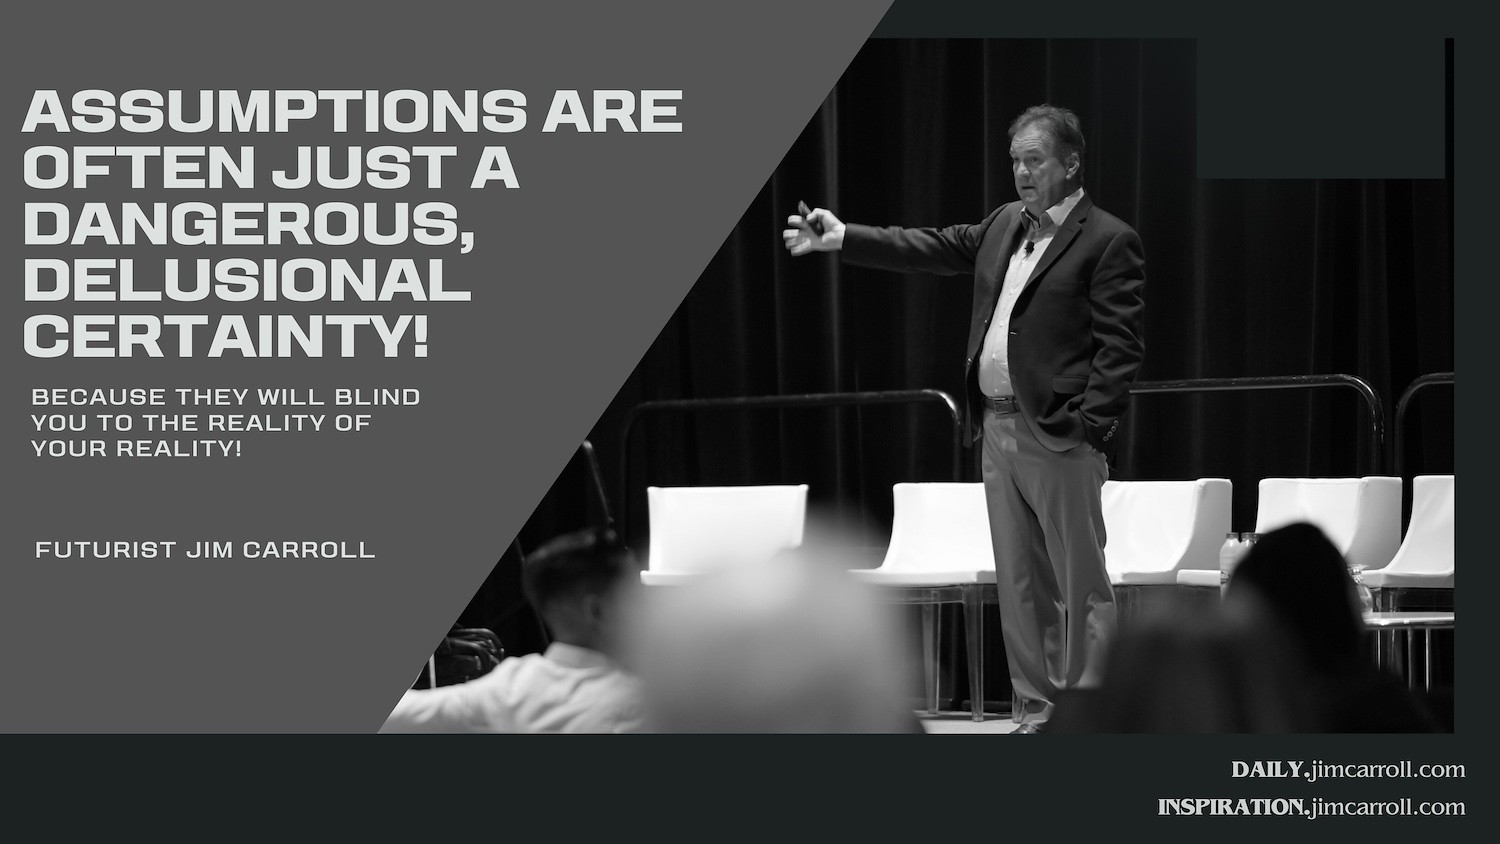 "Assumptions are often just a dangerous, delusional certainty! (Because they will blind you to the reality of your reality!)" - Futurist Jim Carroll